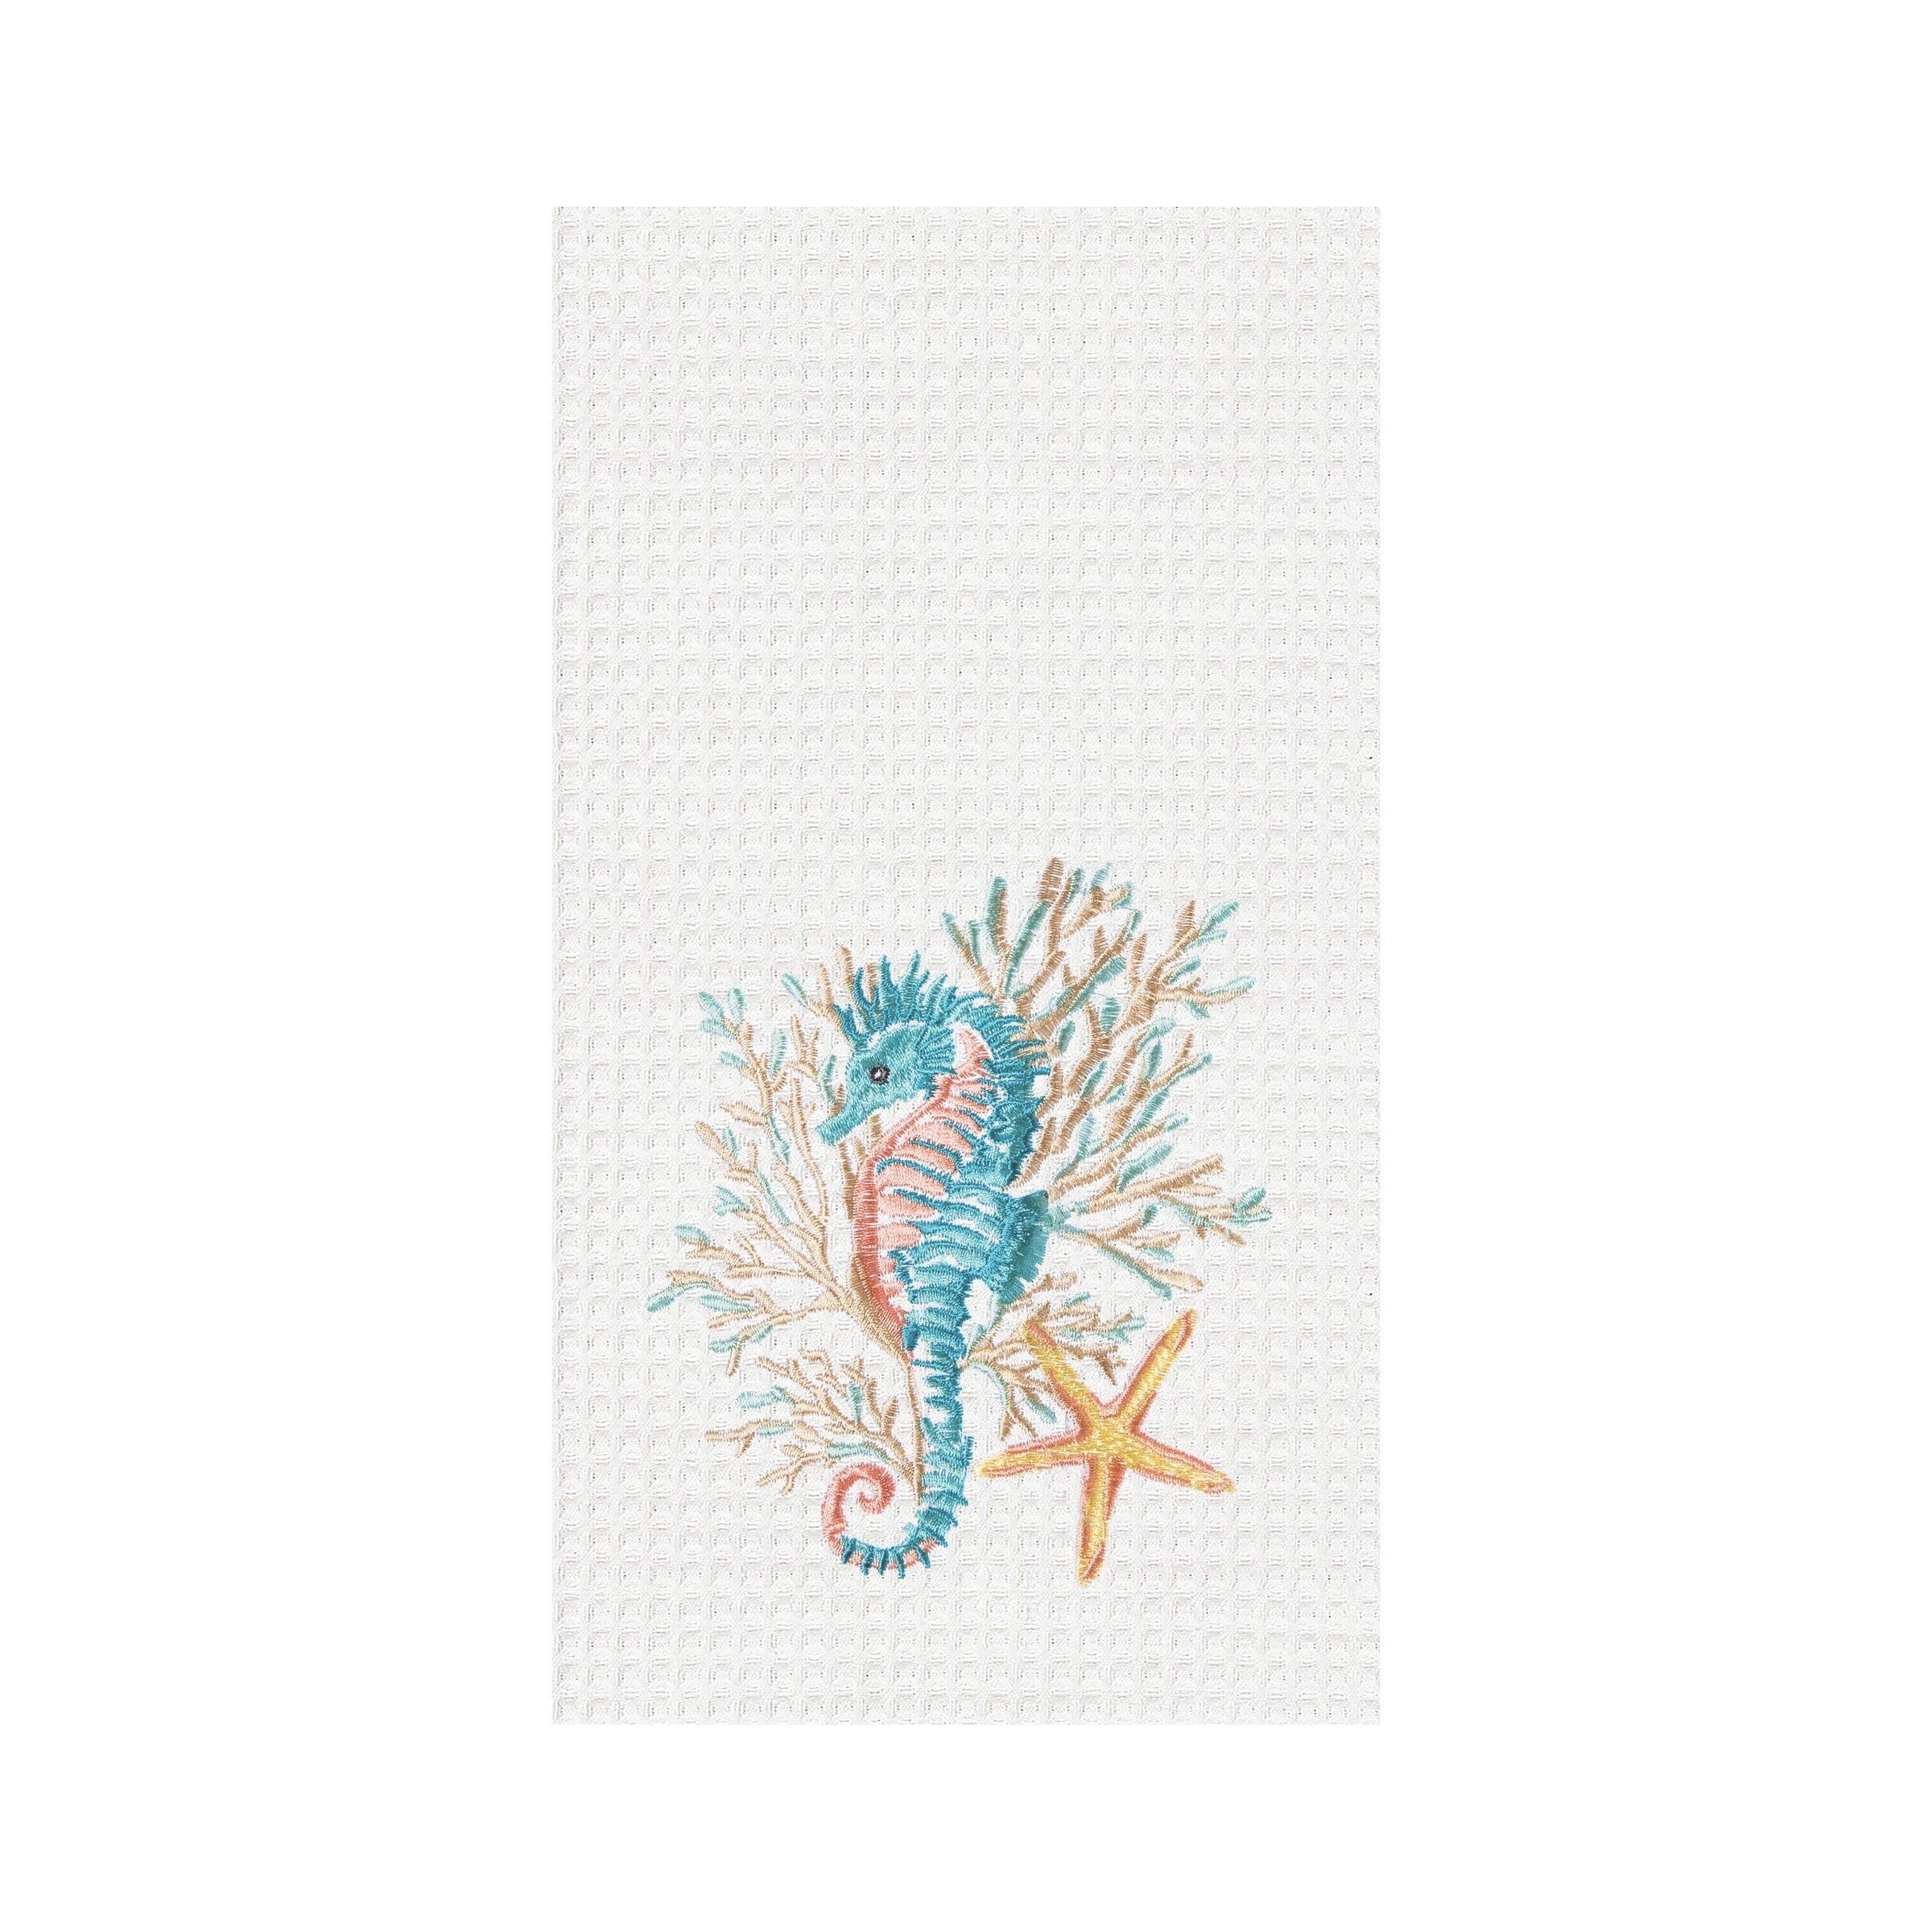 https://ak1.ostkcdn.com/images/products/is/images/direct/fba39fd1ae1d9cd572e87ebfb7322d6f1f40c5ca/Seahorse-And-Coral-Embroidered-Waffle-Weave-Cotton-Kitchen-Towel.jpg